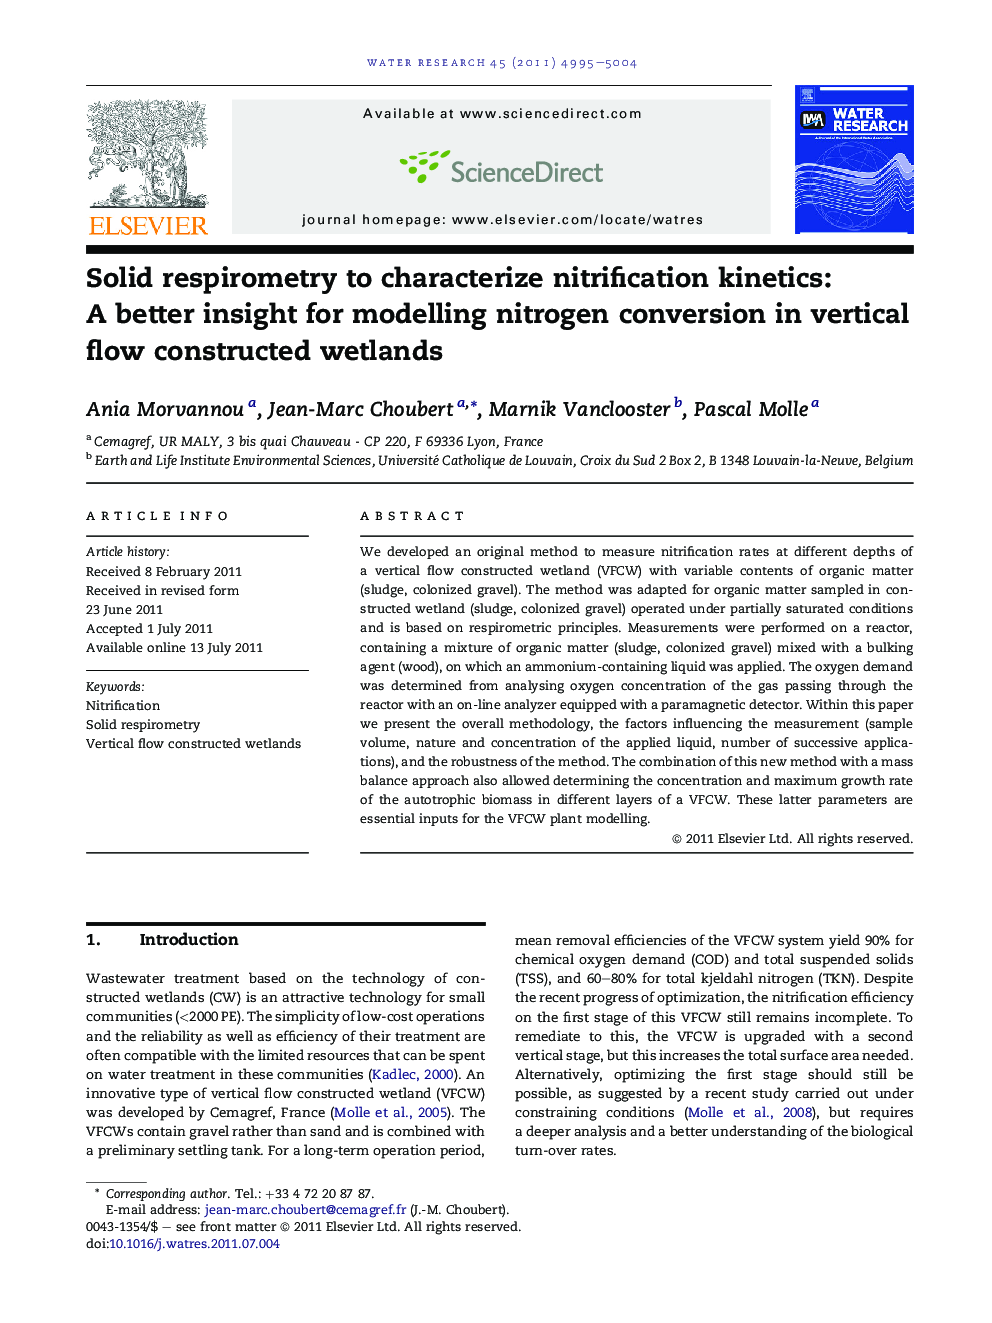 Solid respirometry to characterize nitrification kinetics: A better insight for modelling nitrogen conversion in vertical flow constructed wetlands